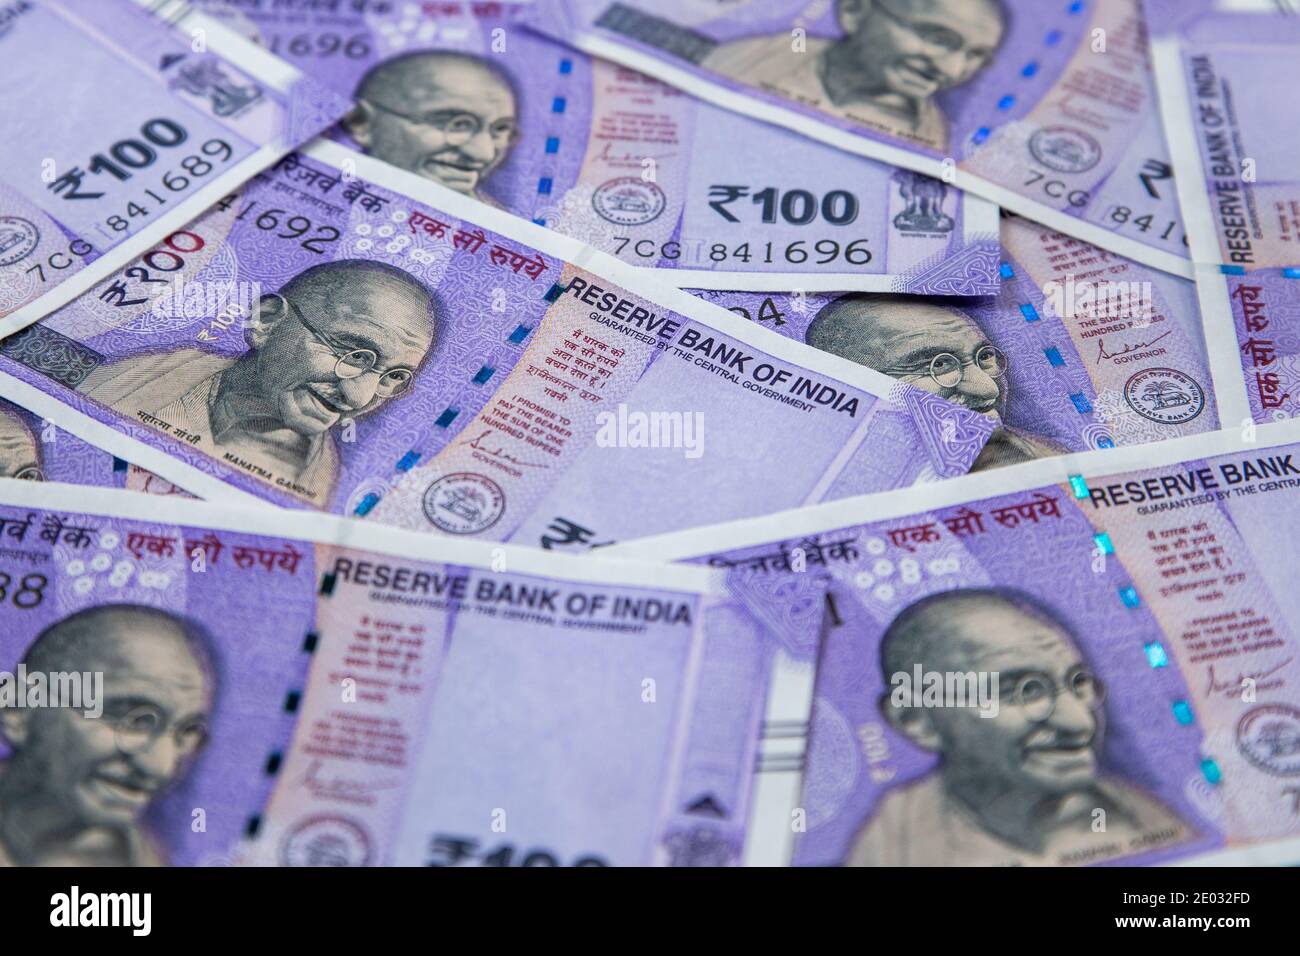 one hundred rupees bank note - India currency background Stock Photo